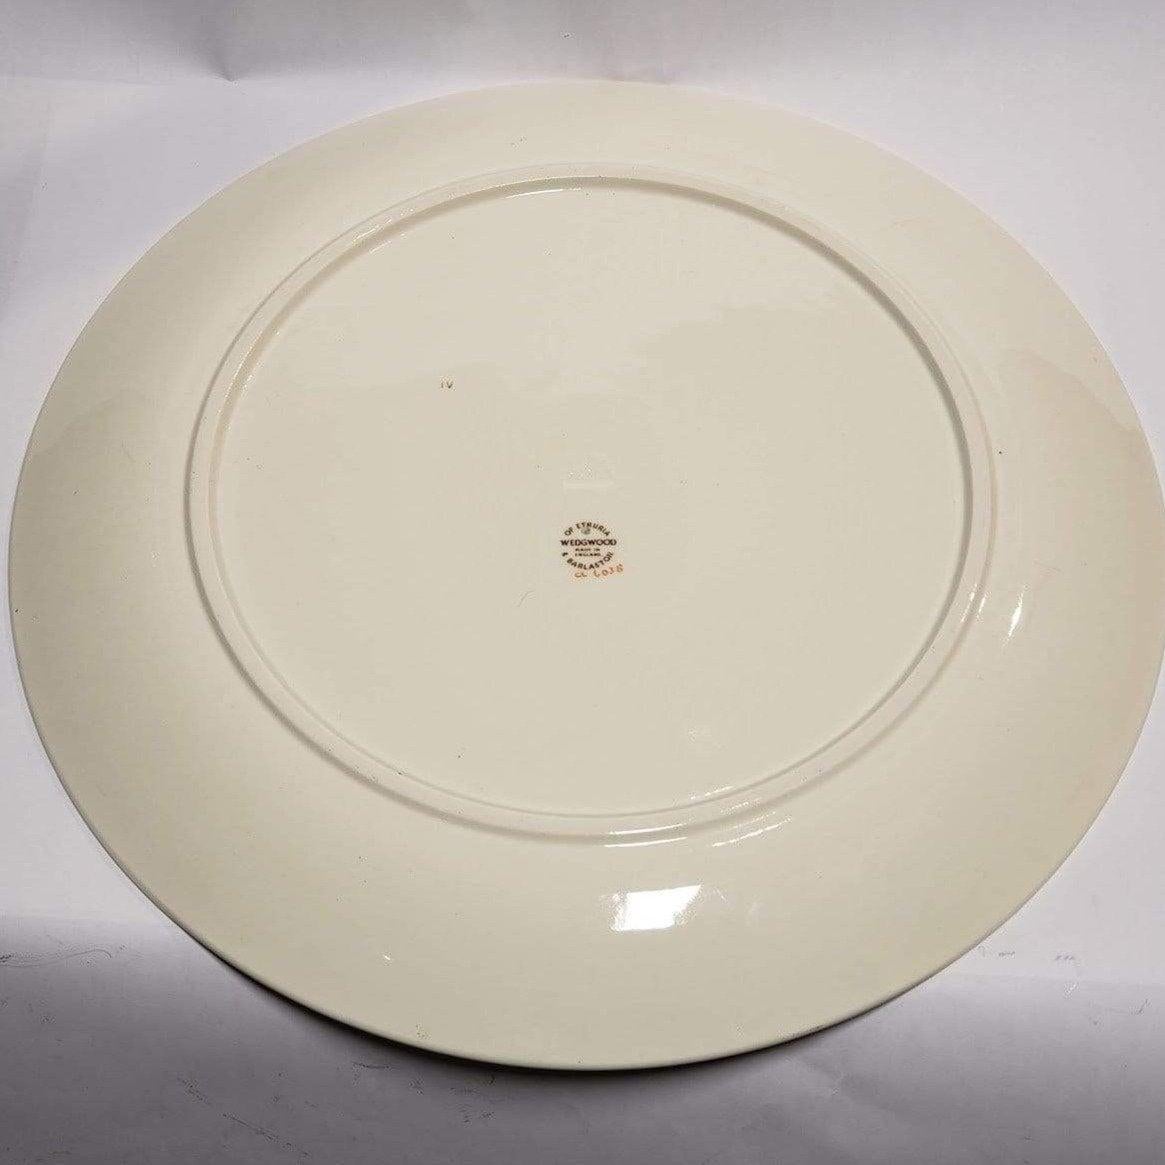 Wedgewood of Etruria & Barlaston Floral platter, style code CC6038. Rare platter, no sales history online found for this pattern. In immaculate condition and measuring 17